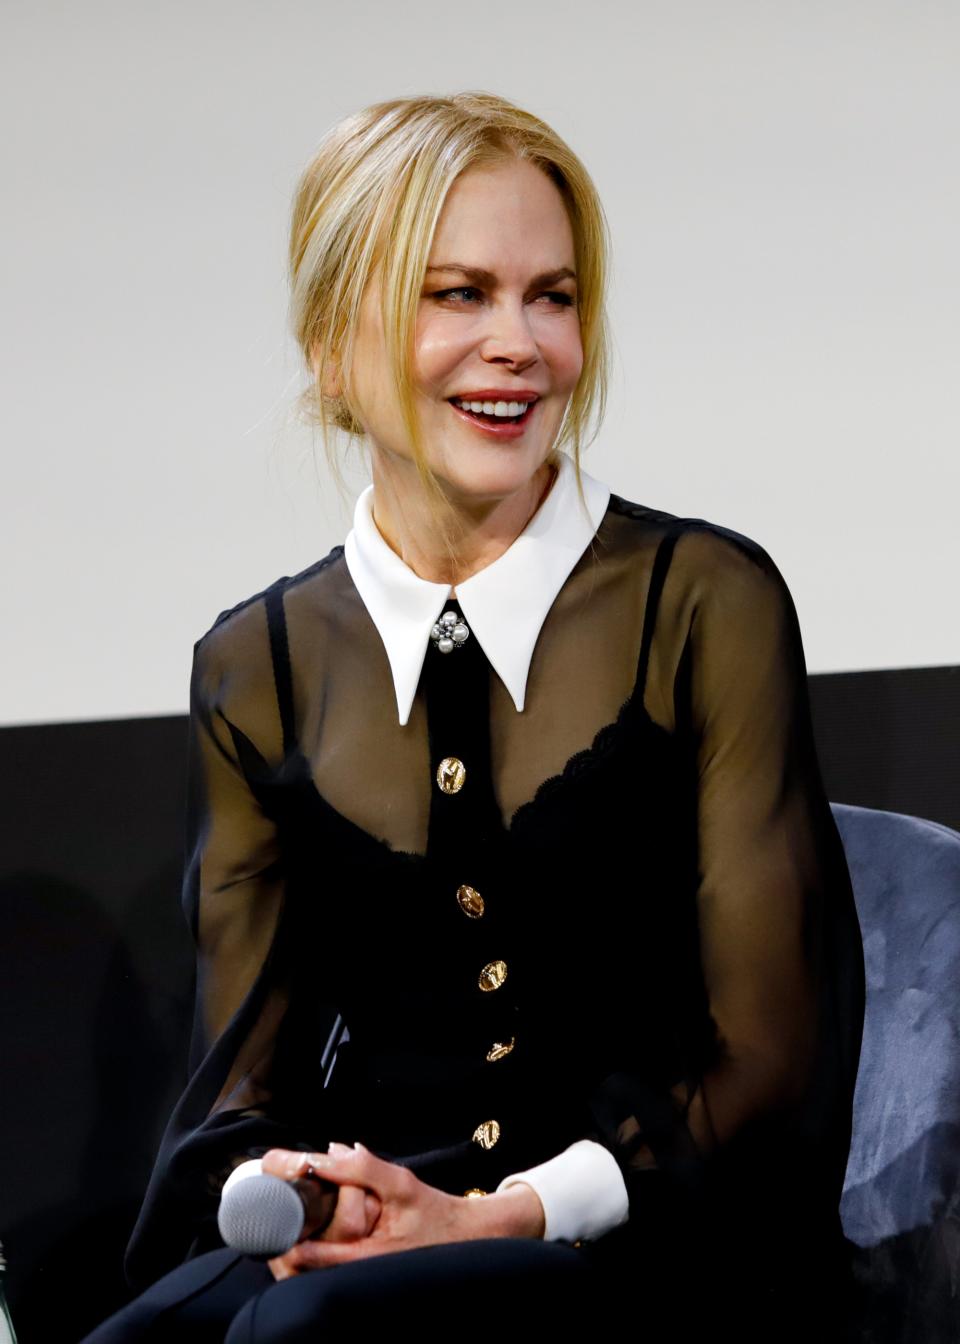 Nicole Kidman attends the official Emmy FYC event for "Expats" held at the Prime Experience at nya WEST on April 28 in Los Angeles.